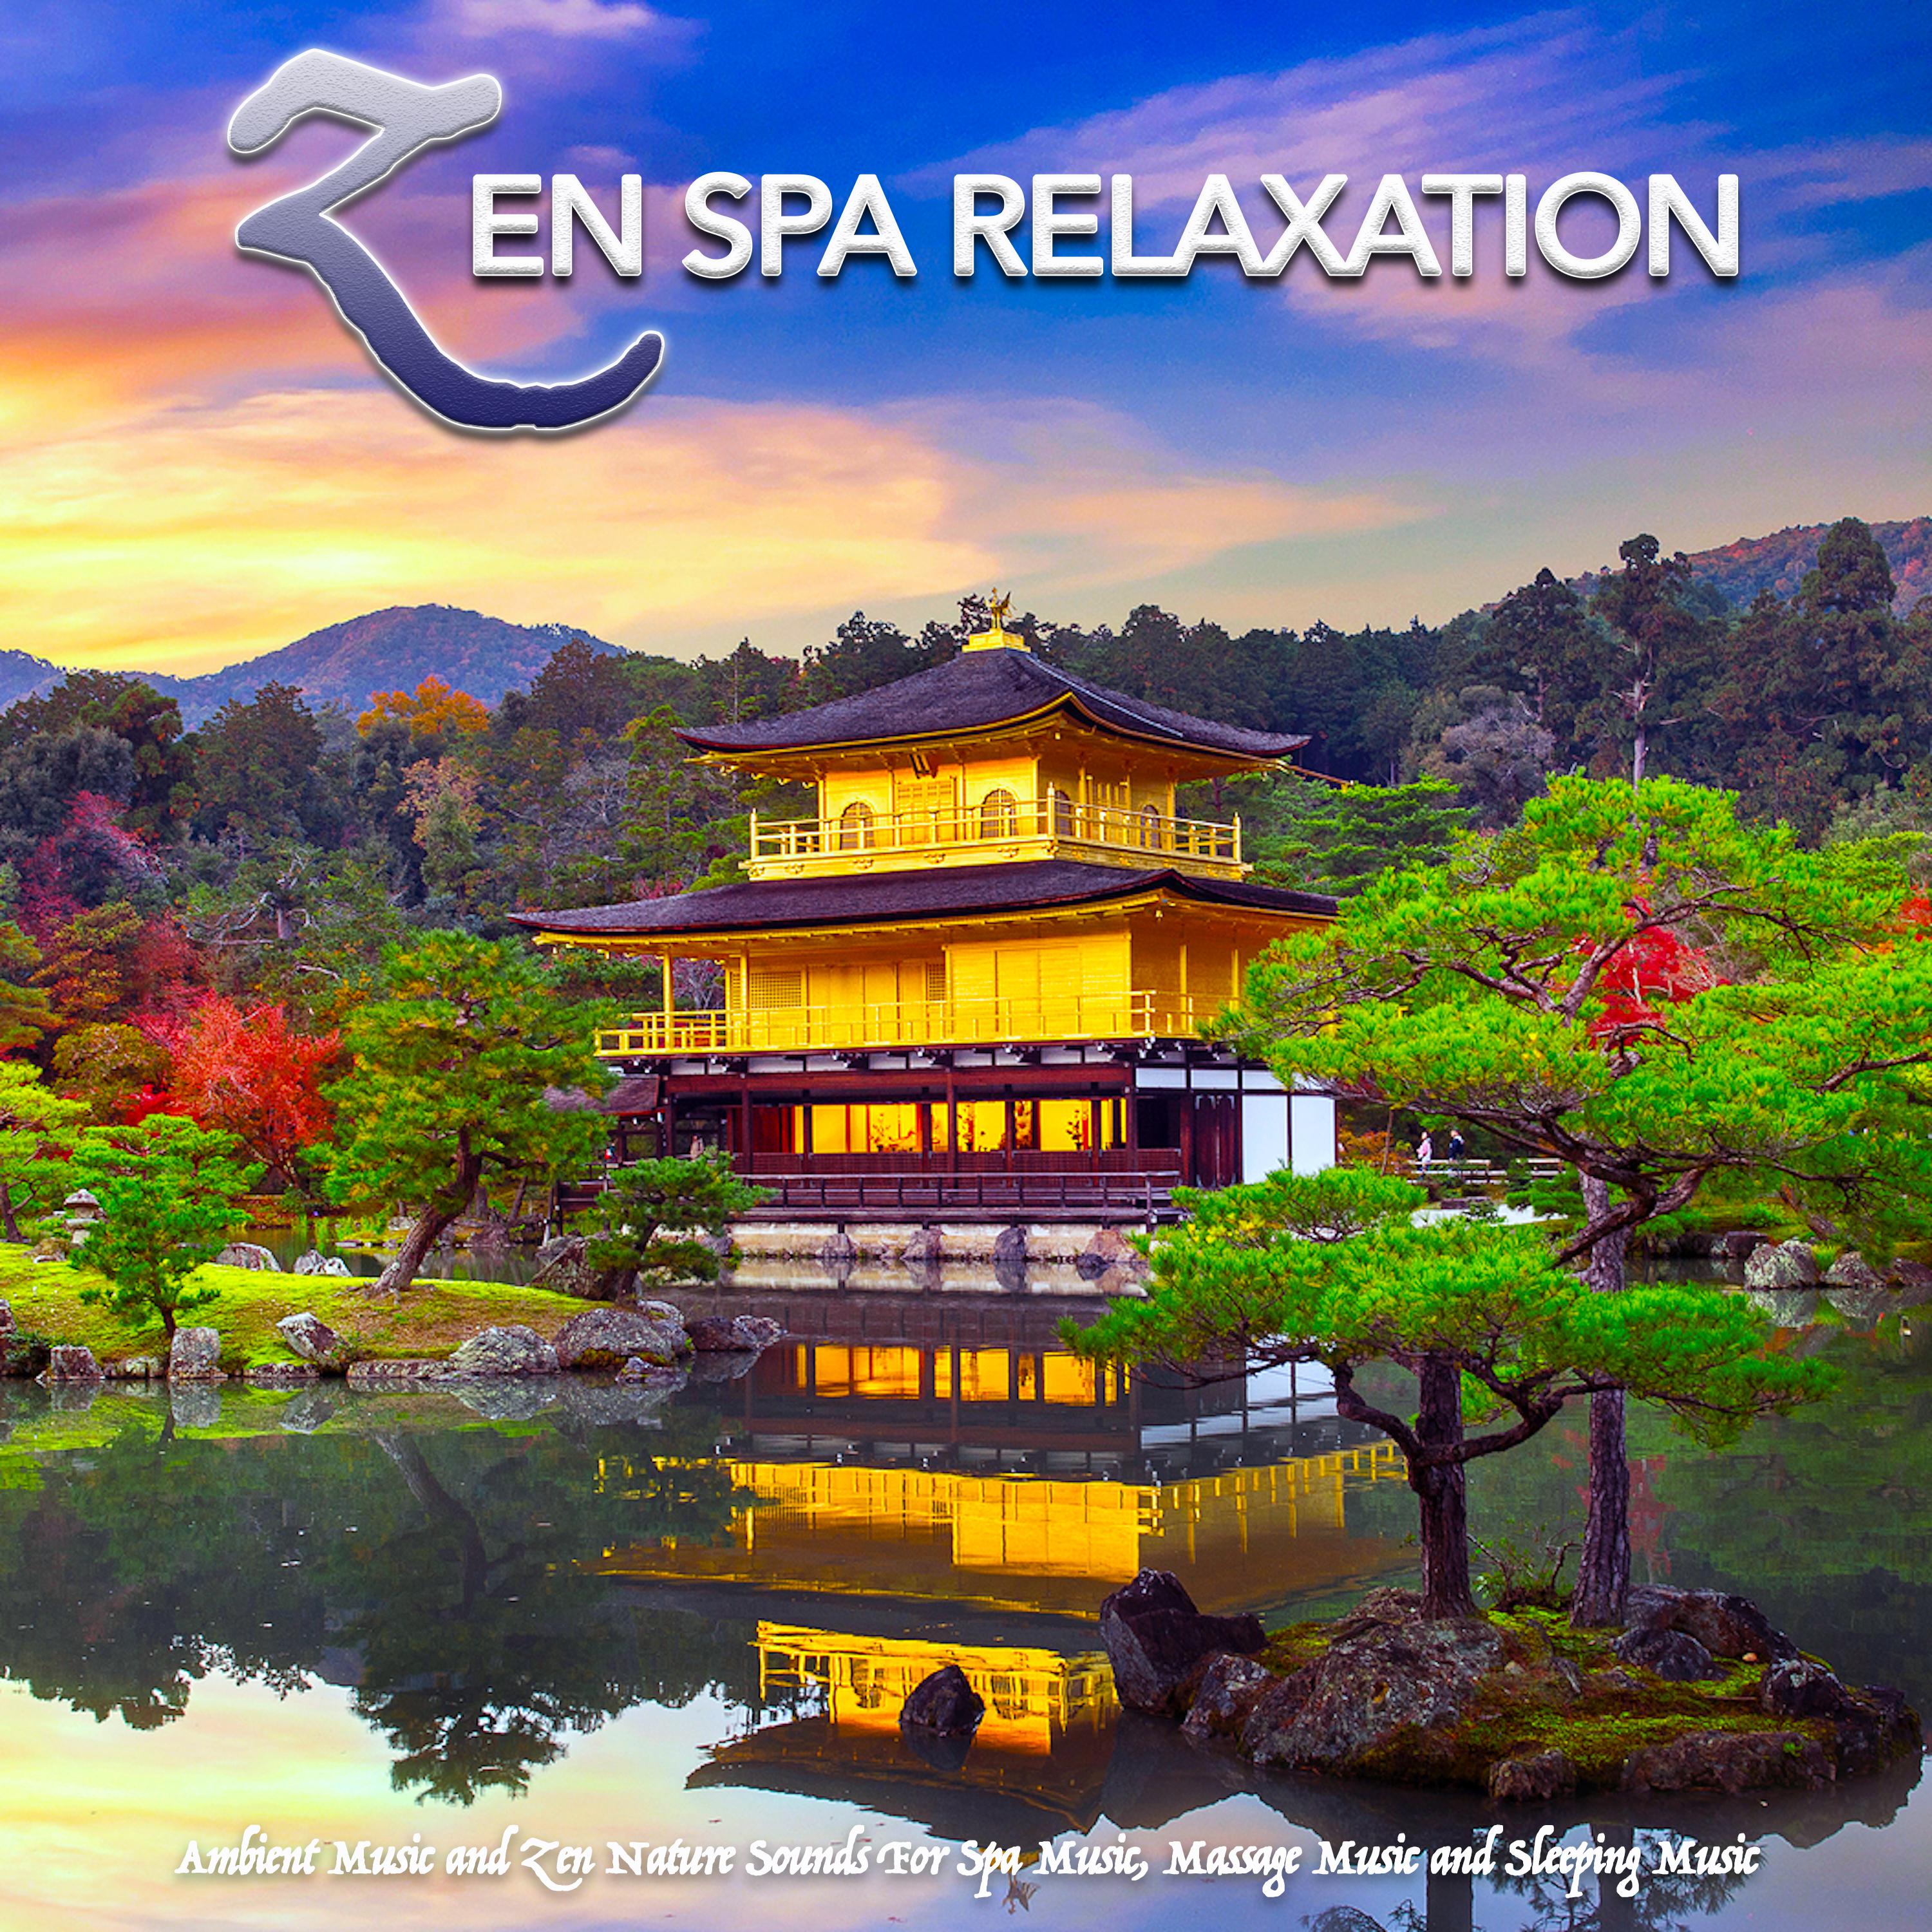 Zen Spa Relaxation: Ambient Music and Zen Nature Sounds For Spa Music, Massage Music and Sleeping Music